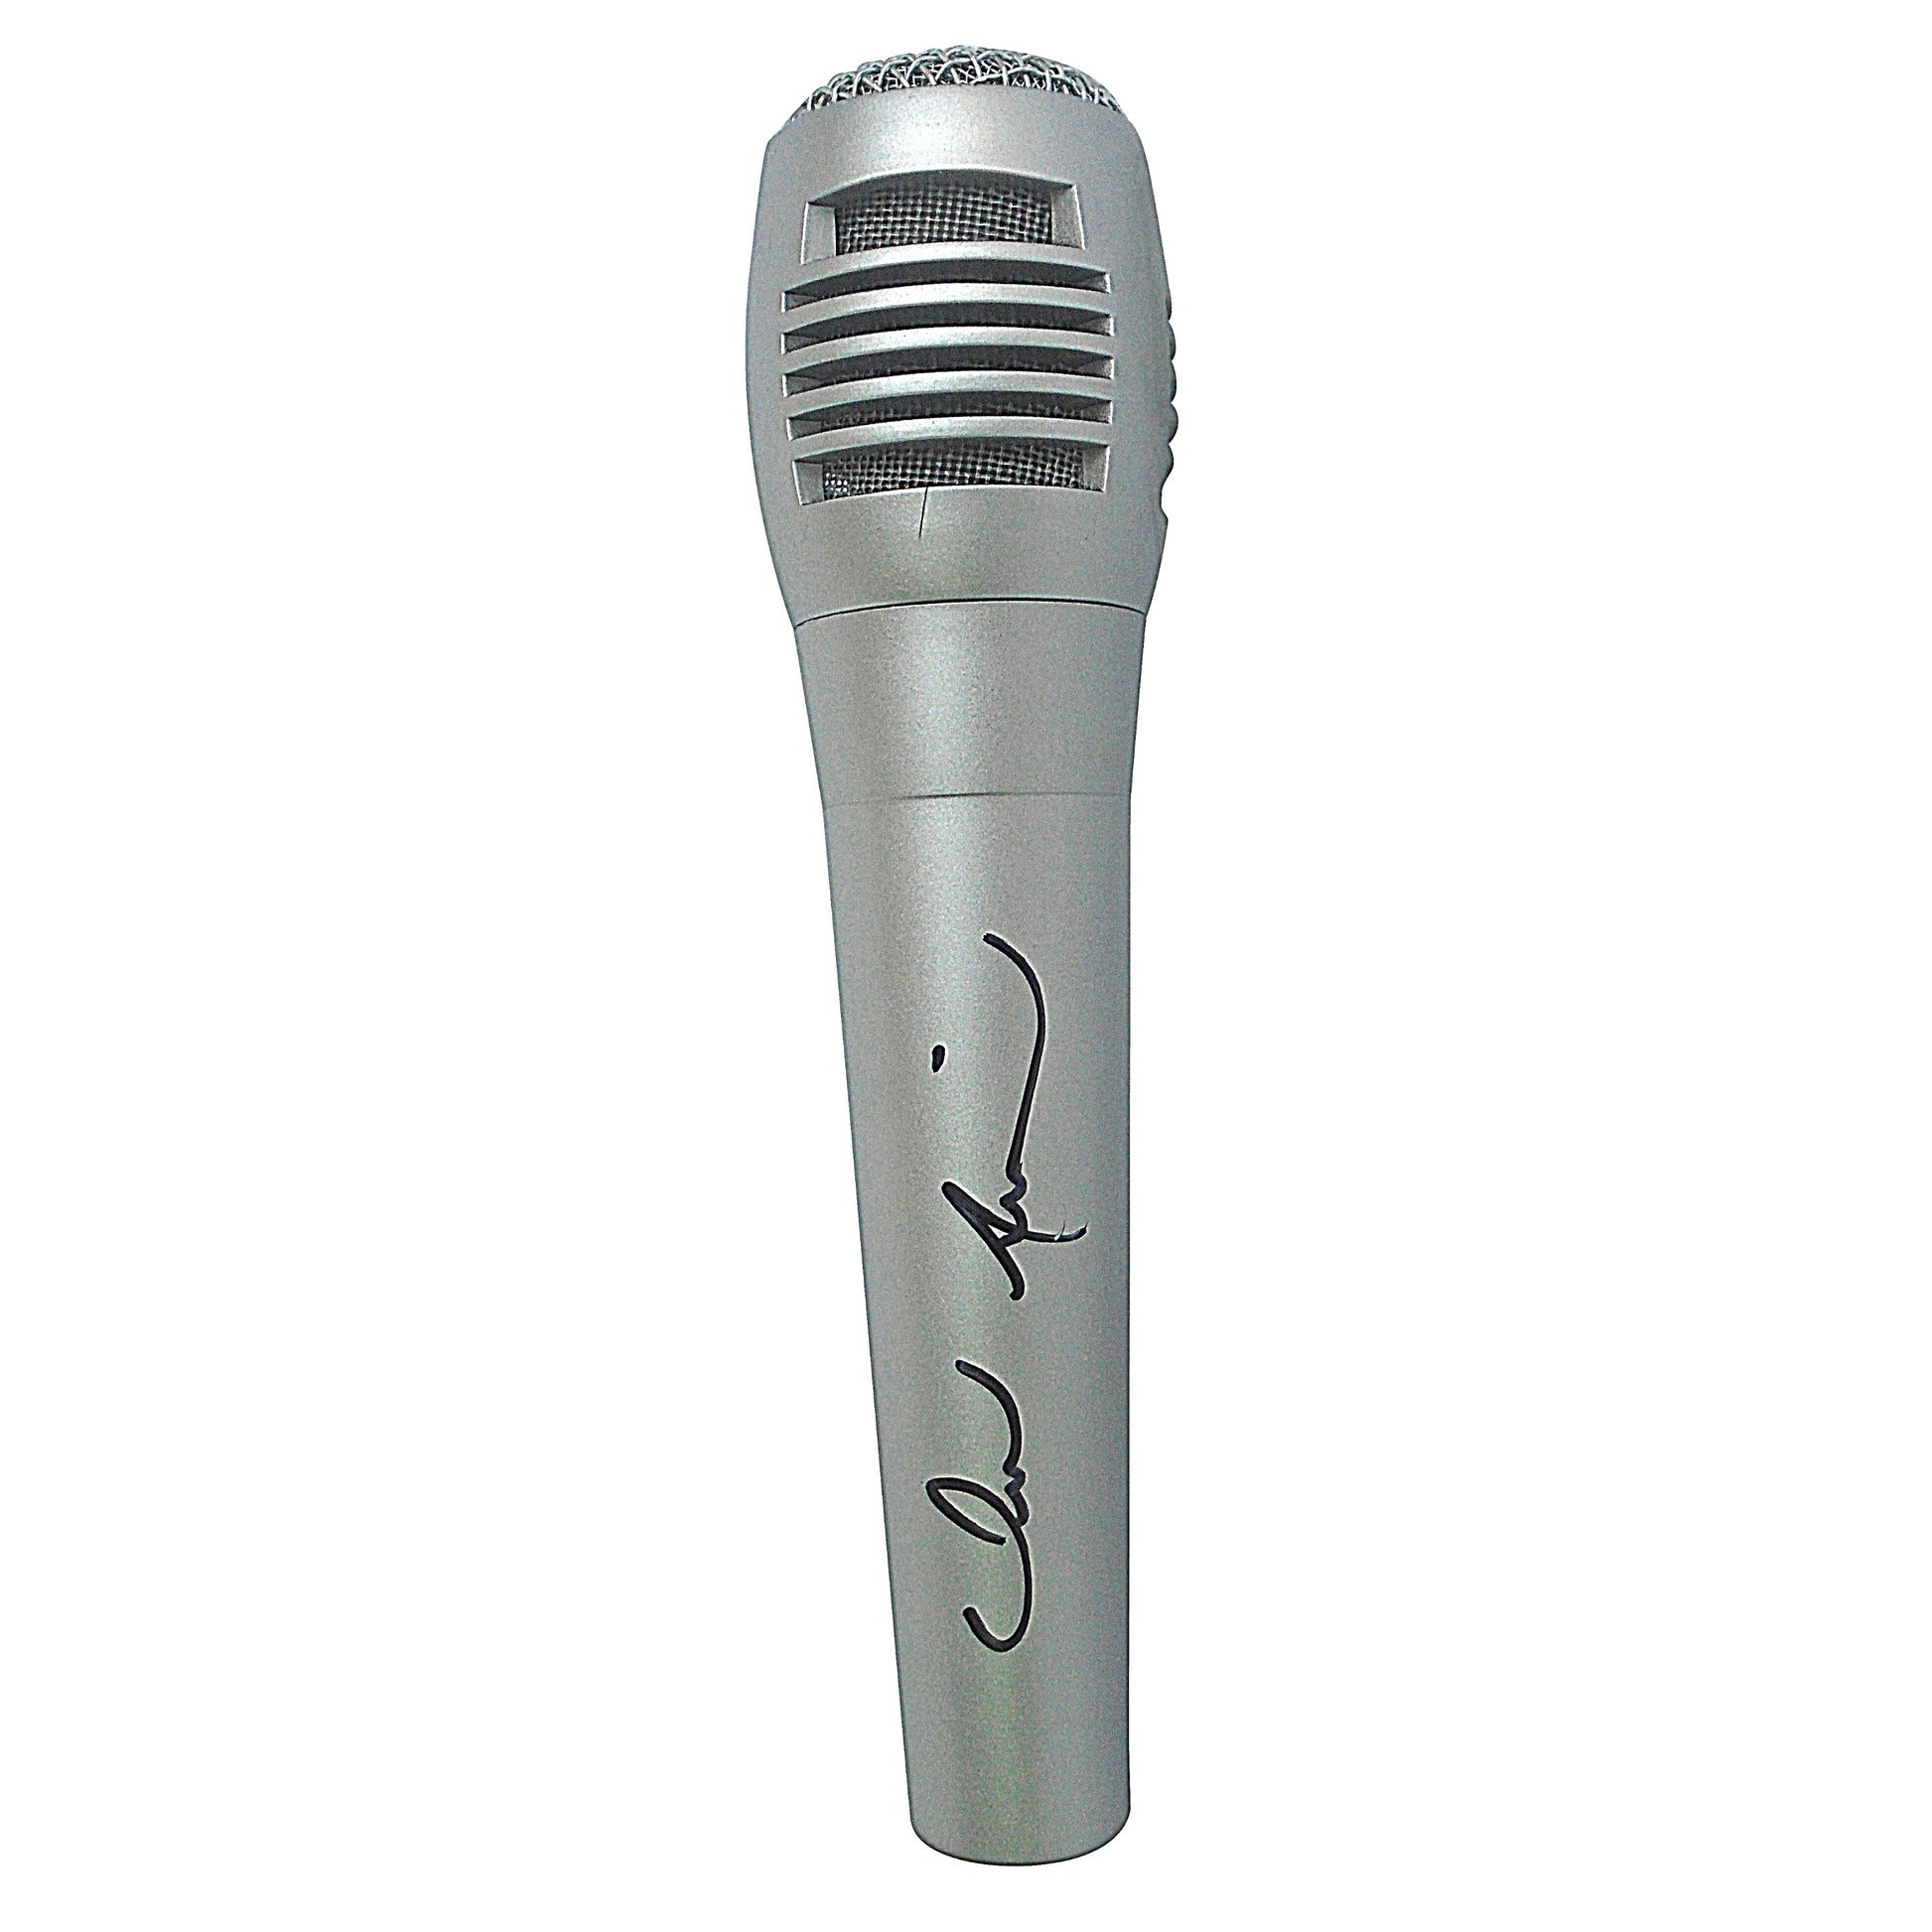 Microphones-Autographed - Jerrod Niemann Signed Pyle Full Size Microphone, Proof Photo - Beckett BAS 203